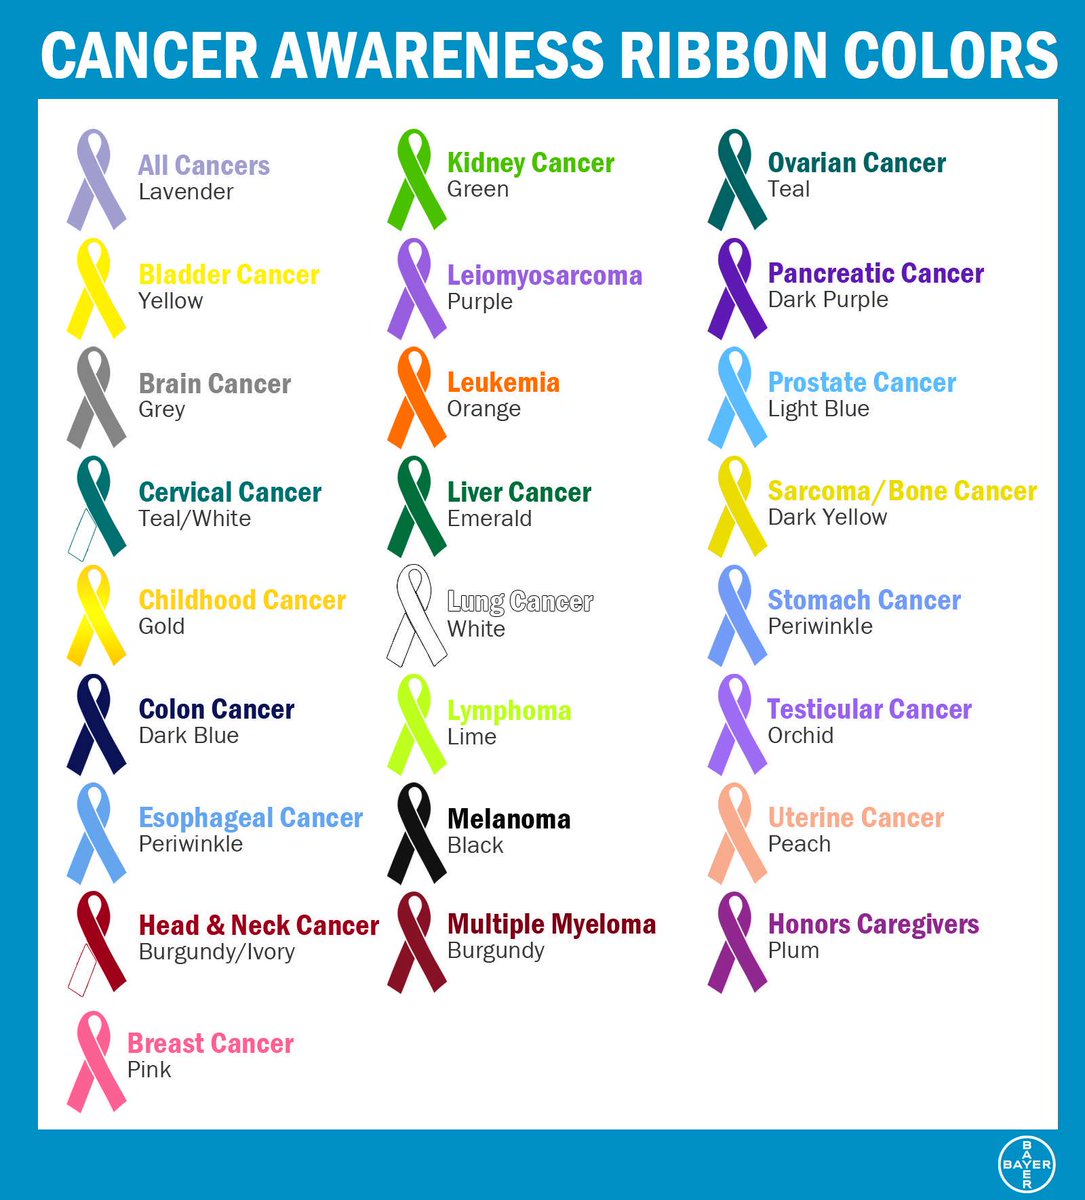 Today Is Worldcancerday Cancer Awareness Ribbon Colors Effy Moom Free Coloring Picture wallpaper give a chance to color on the wall without getting in trouble! Fill the walls of your home or office with stress-relieving [effymoom.blogspot.com]